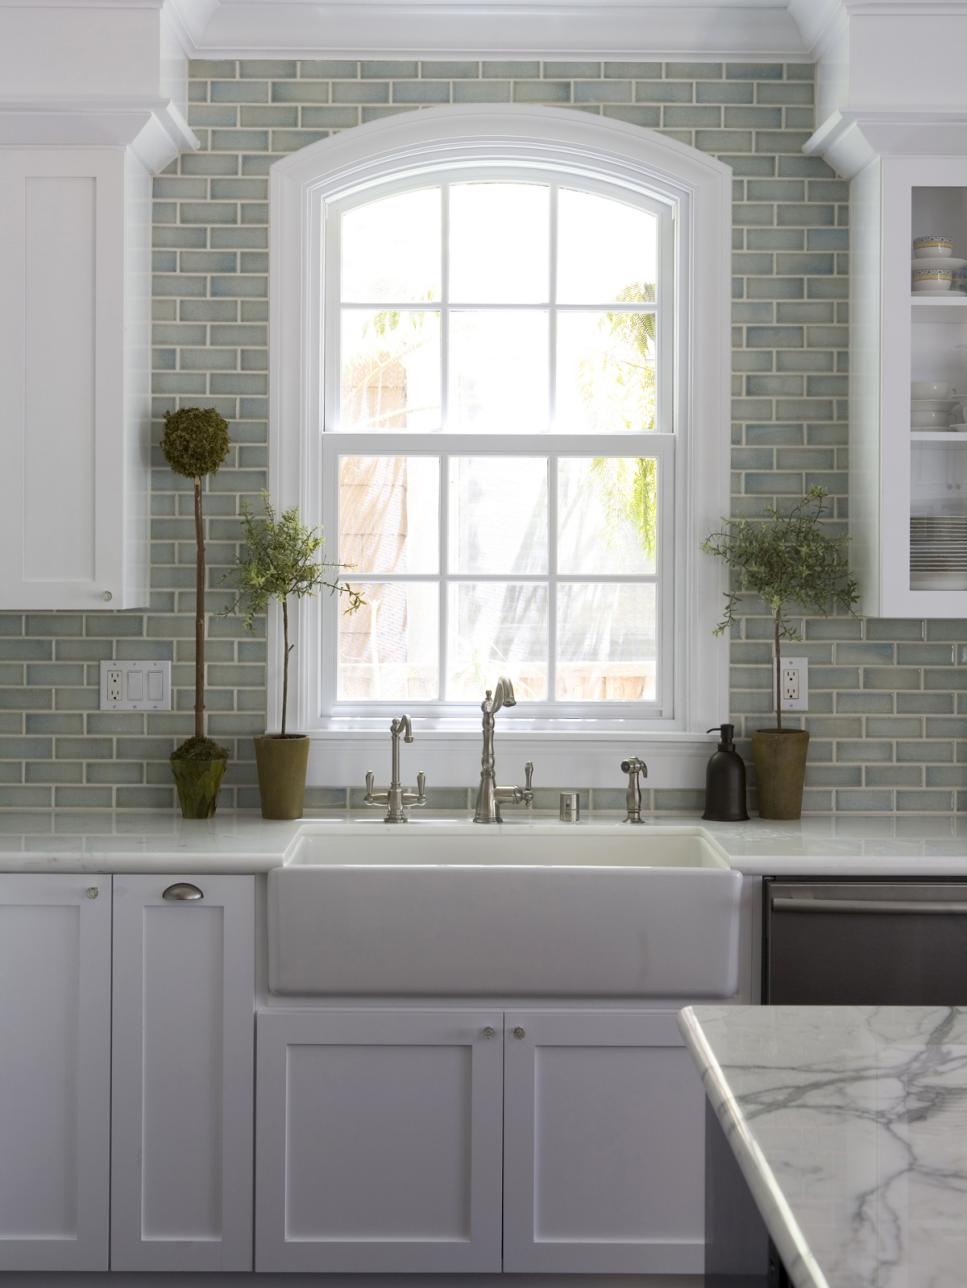 Green Kitchen With White Cabinetry and Subway-Tile Backsplash